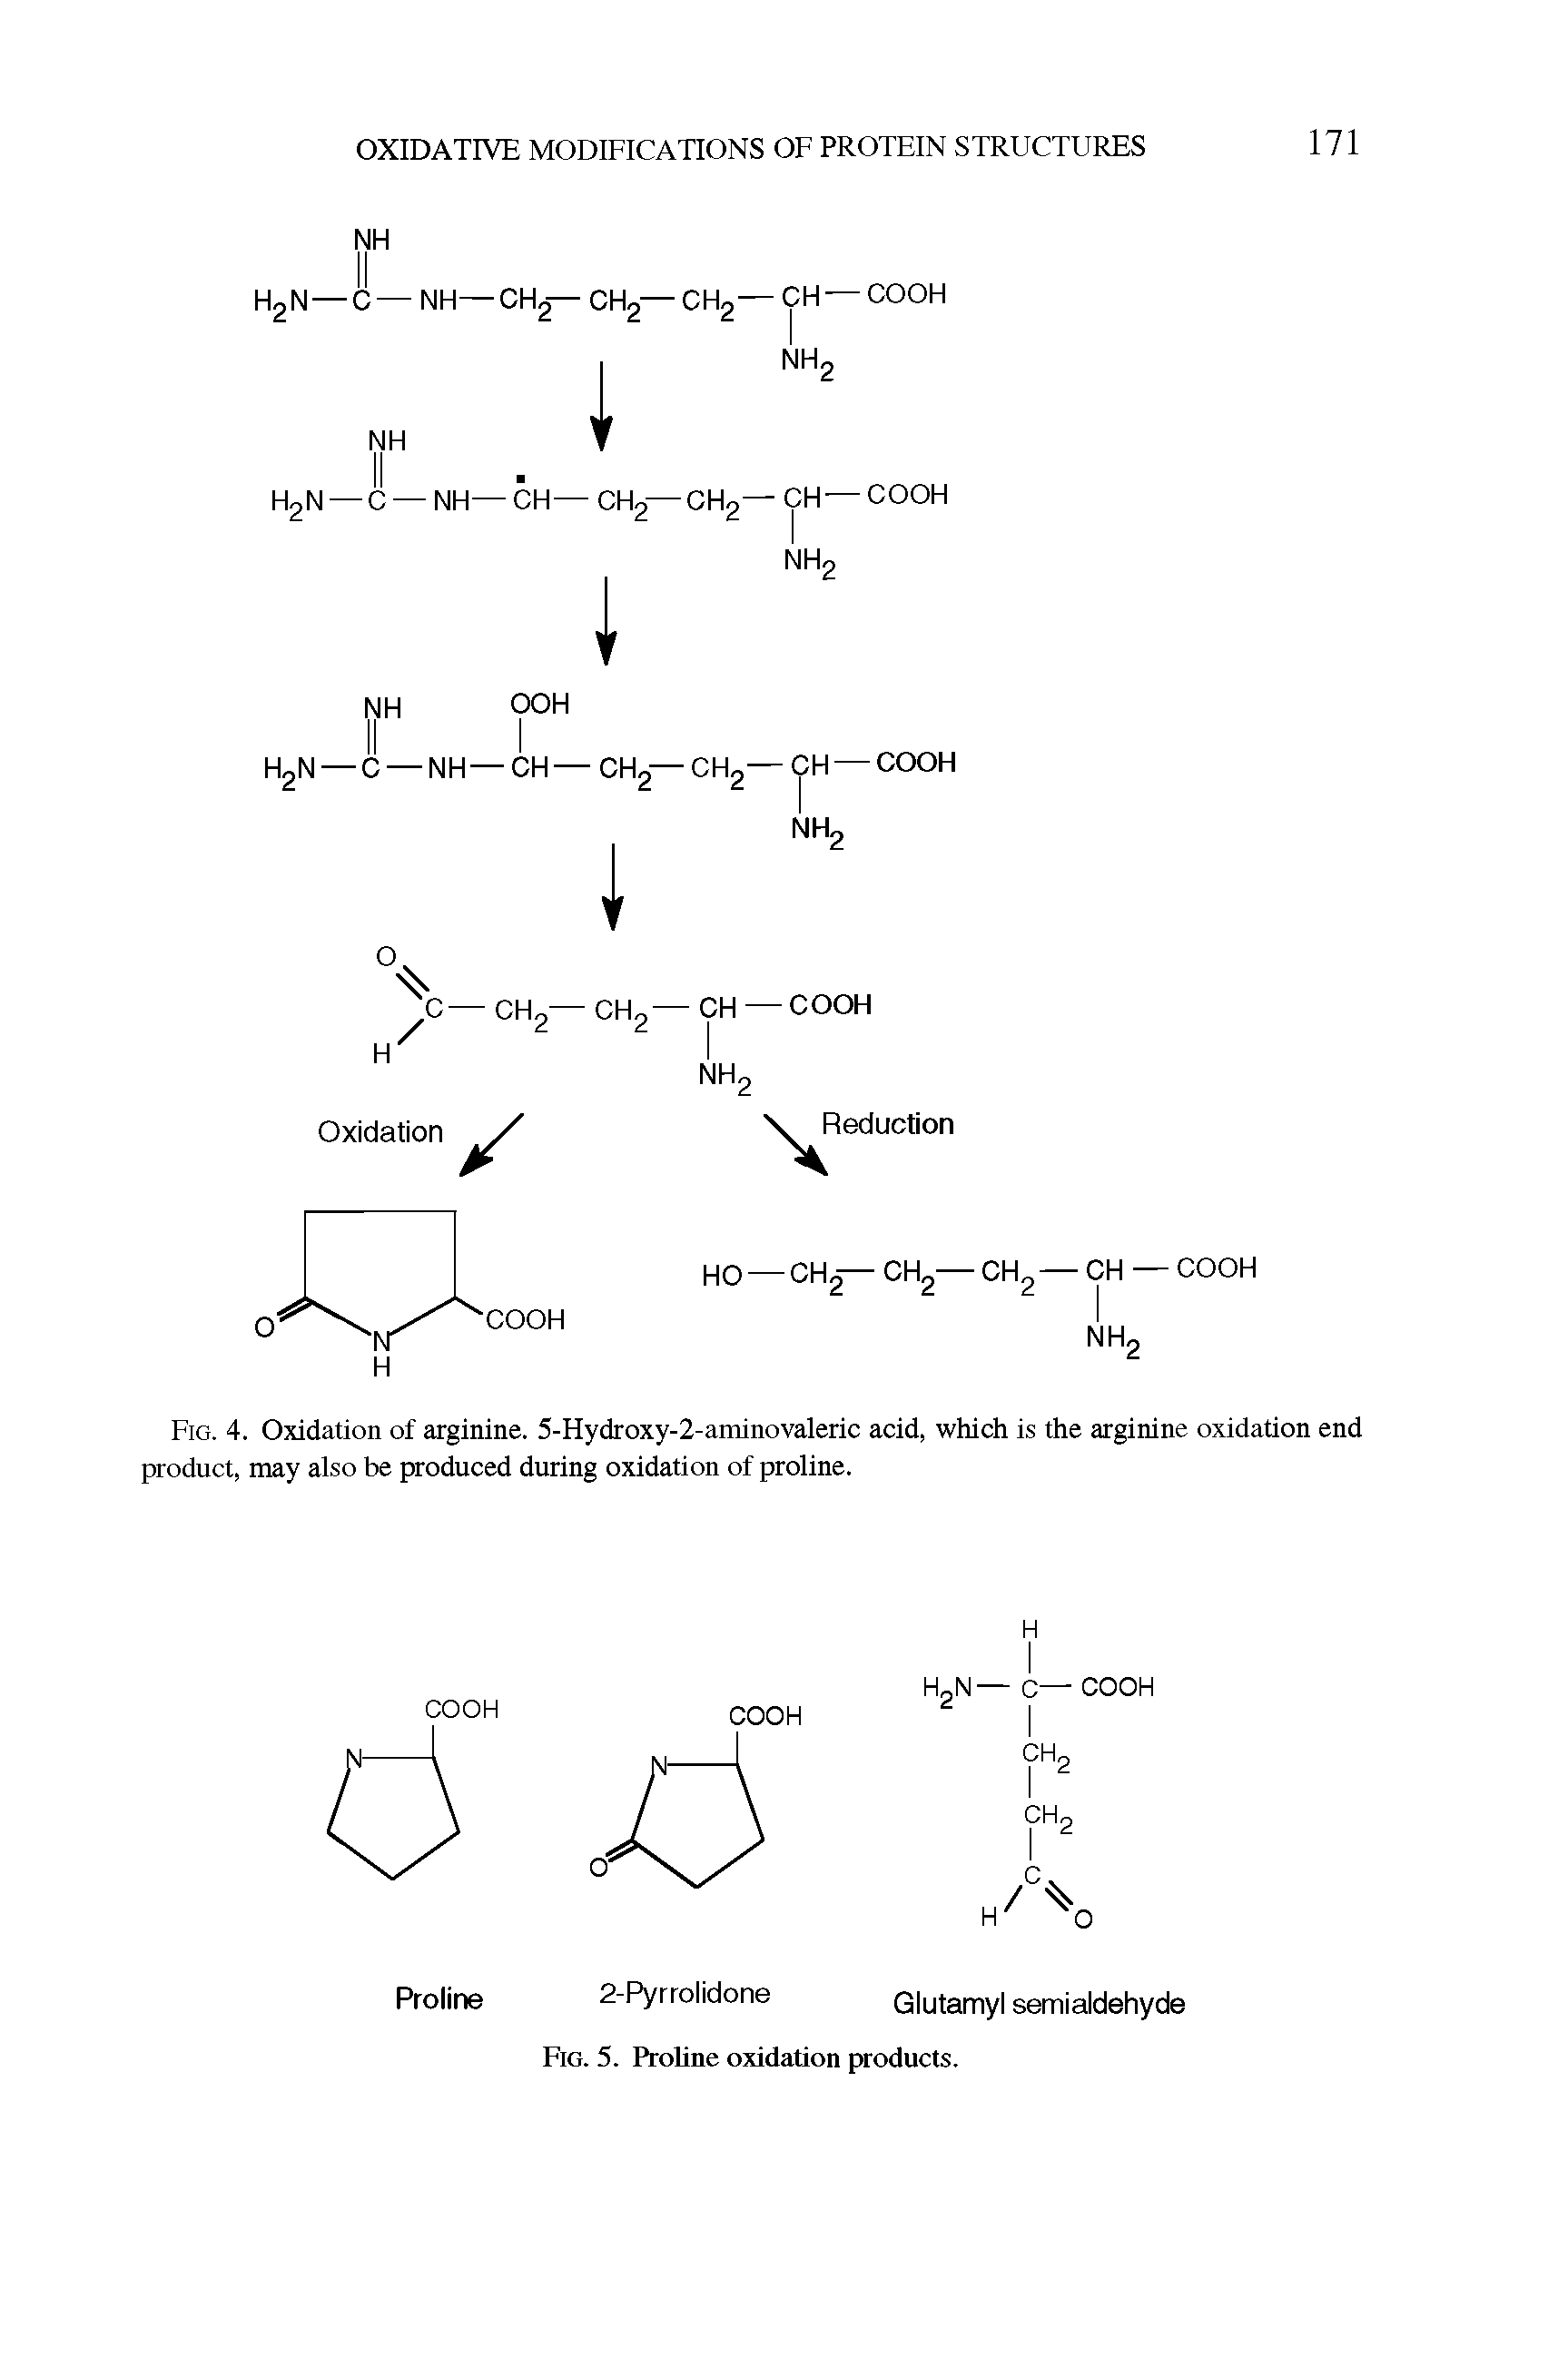 Fig. 4. Oxidation of arginine. 5-Hydroxy-2-aminovaleric acid, which is the arginine oxidation end product, may also be produced during oxidation of proline.